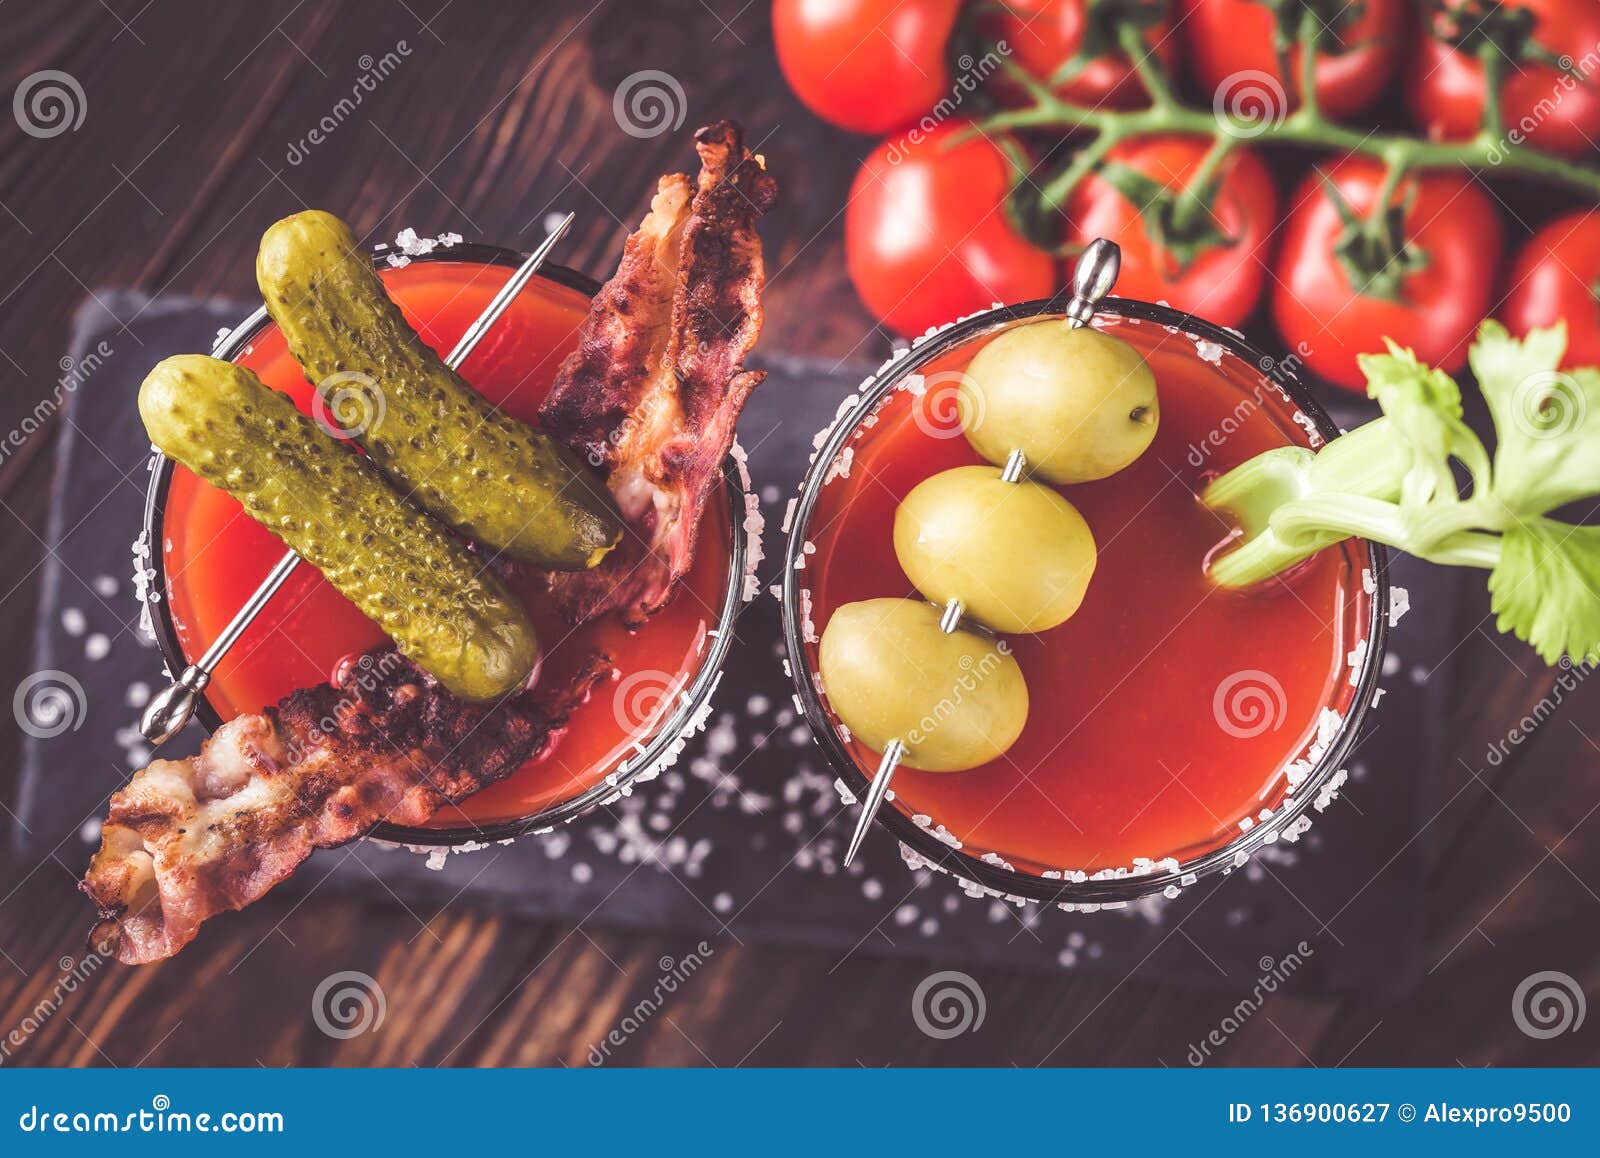 two glasses of bloody mary